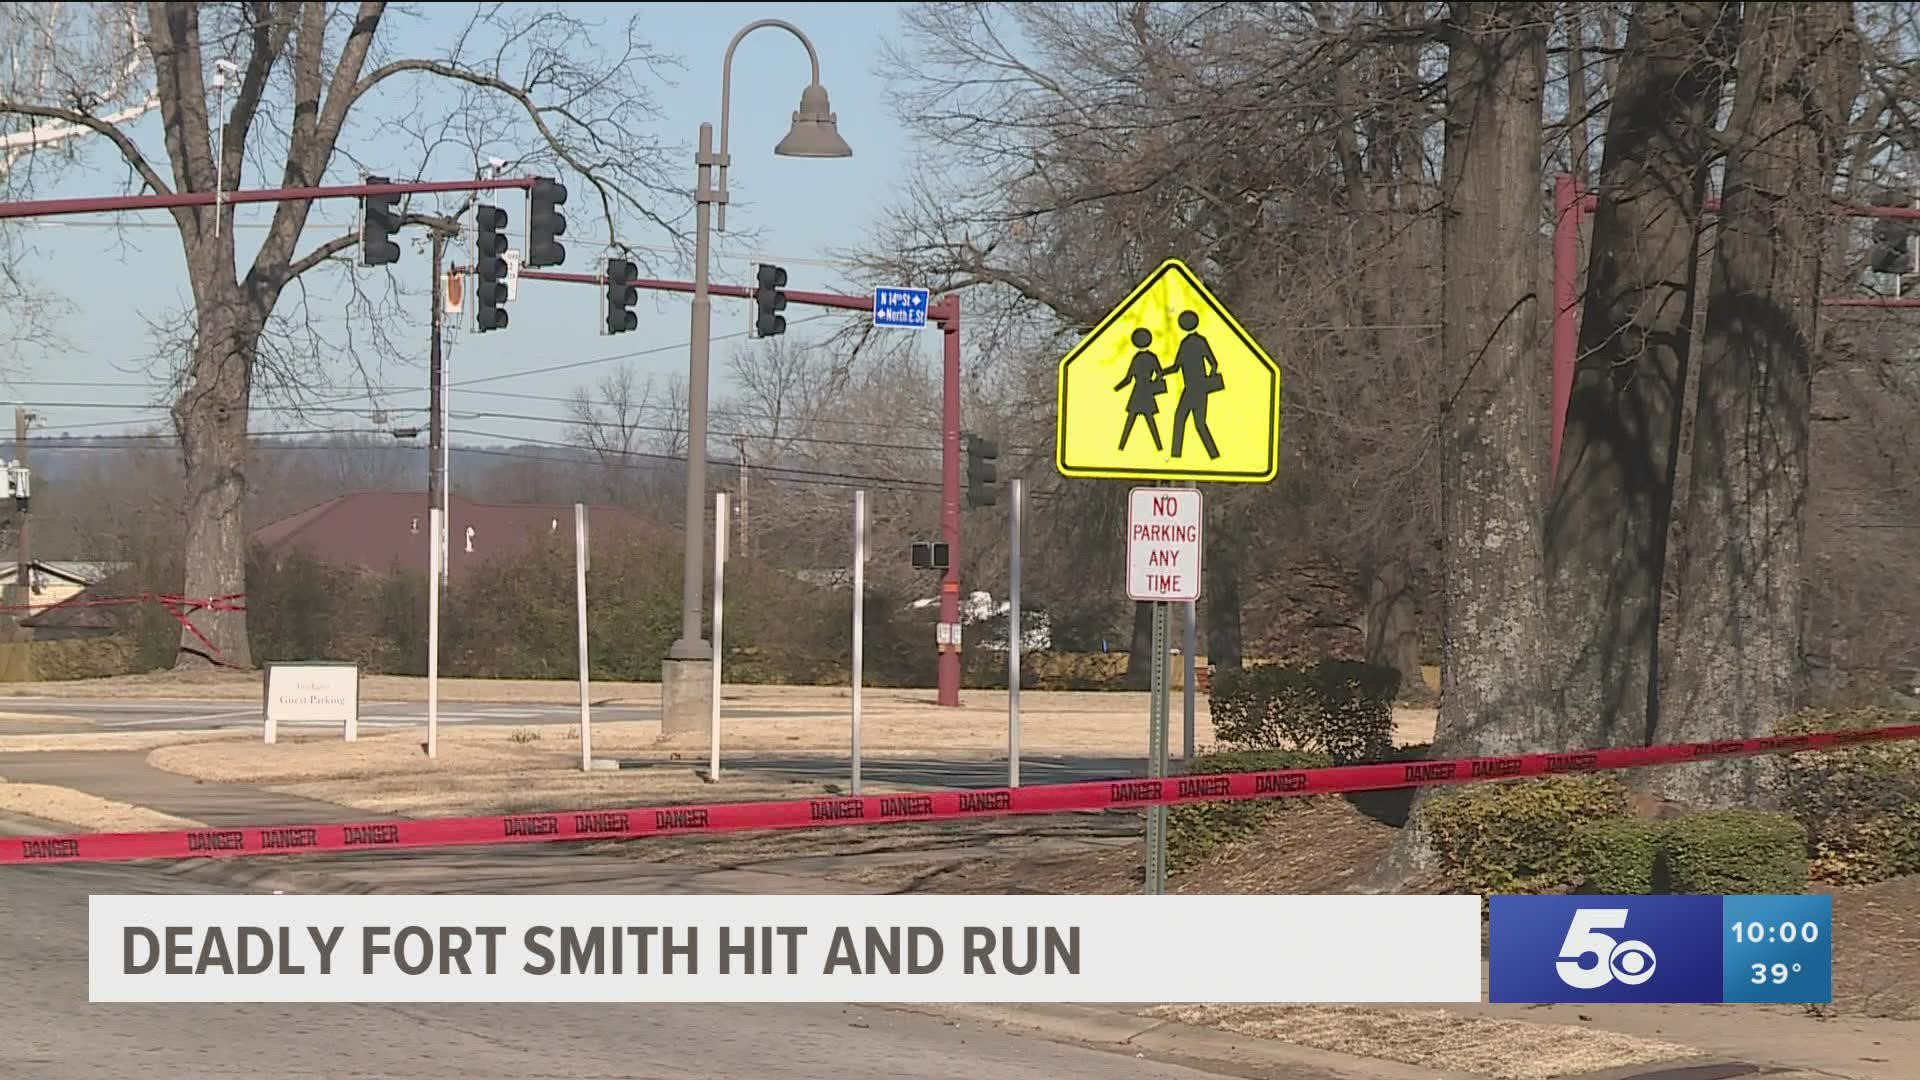 A 42-year-old Fort Smith man was arrested after leaving the scene of a deadly hit-and-run crash with the victim's body in his pickup truck.